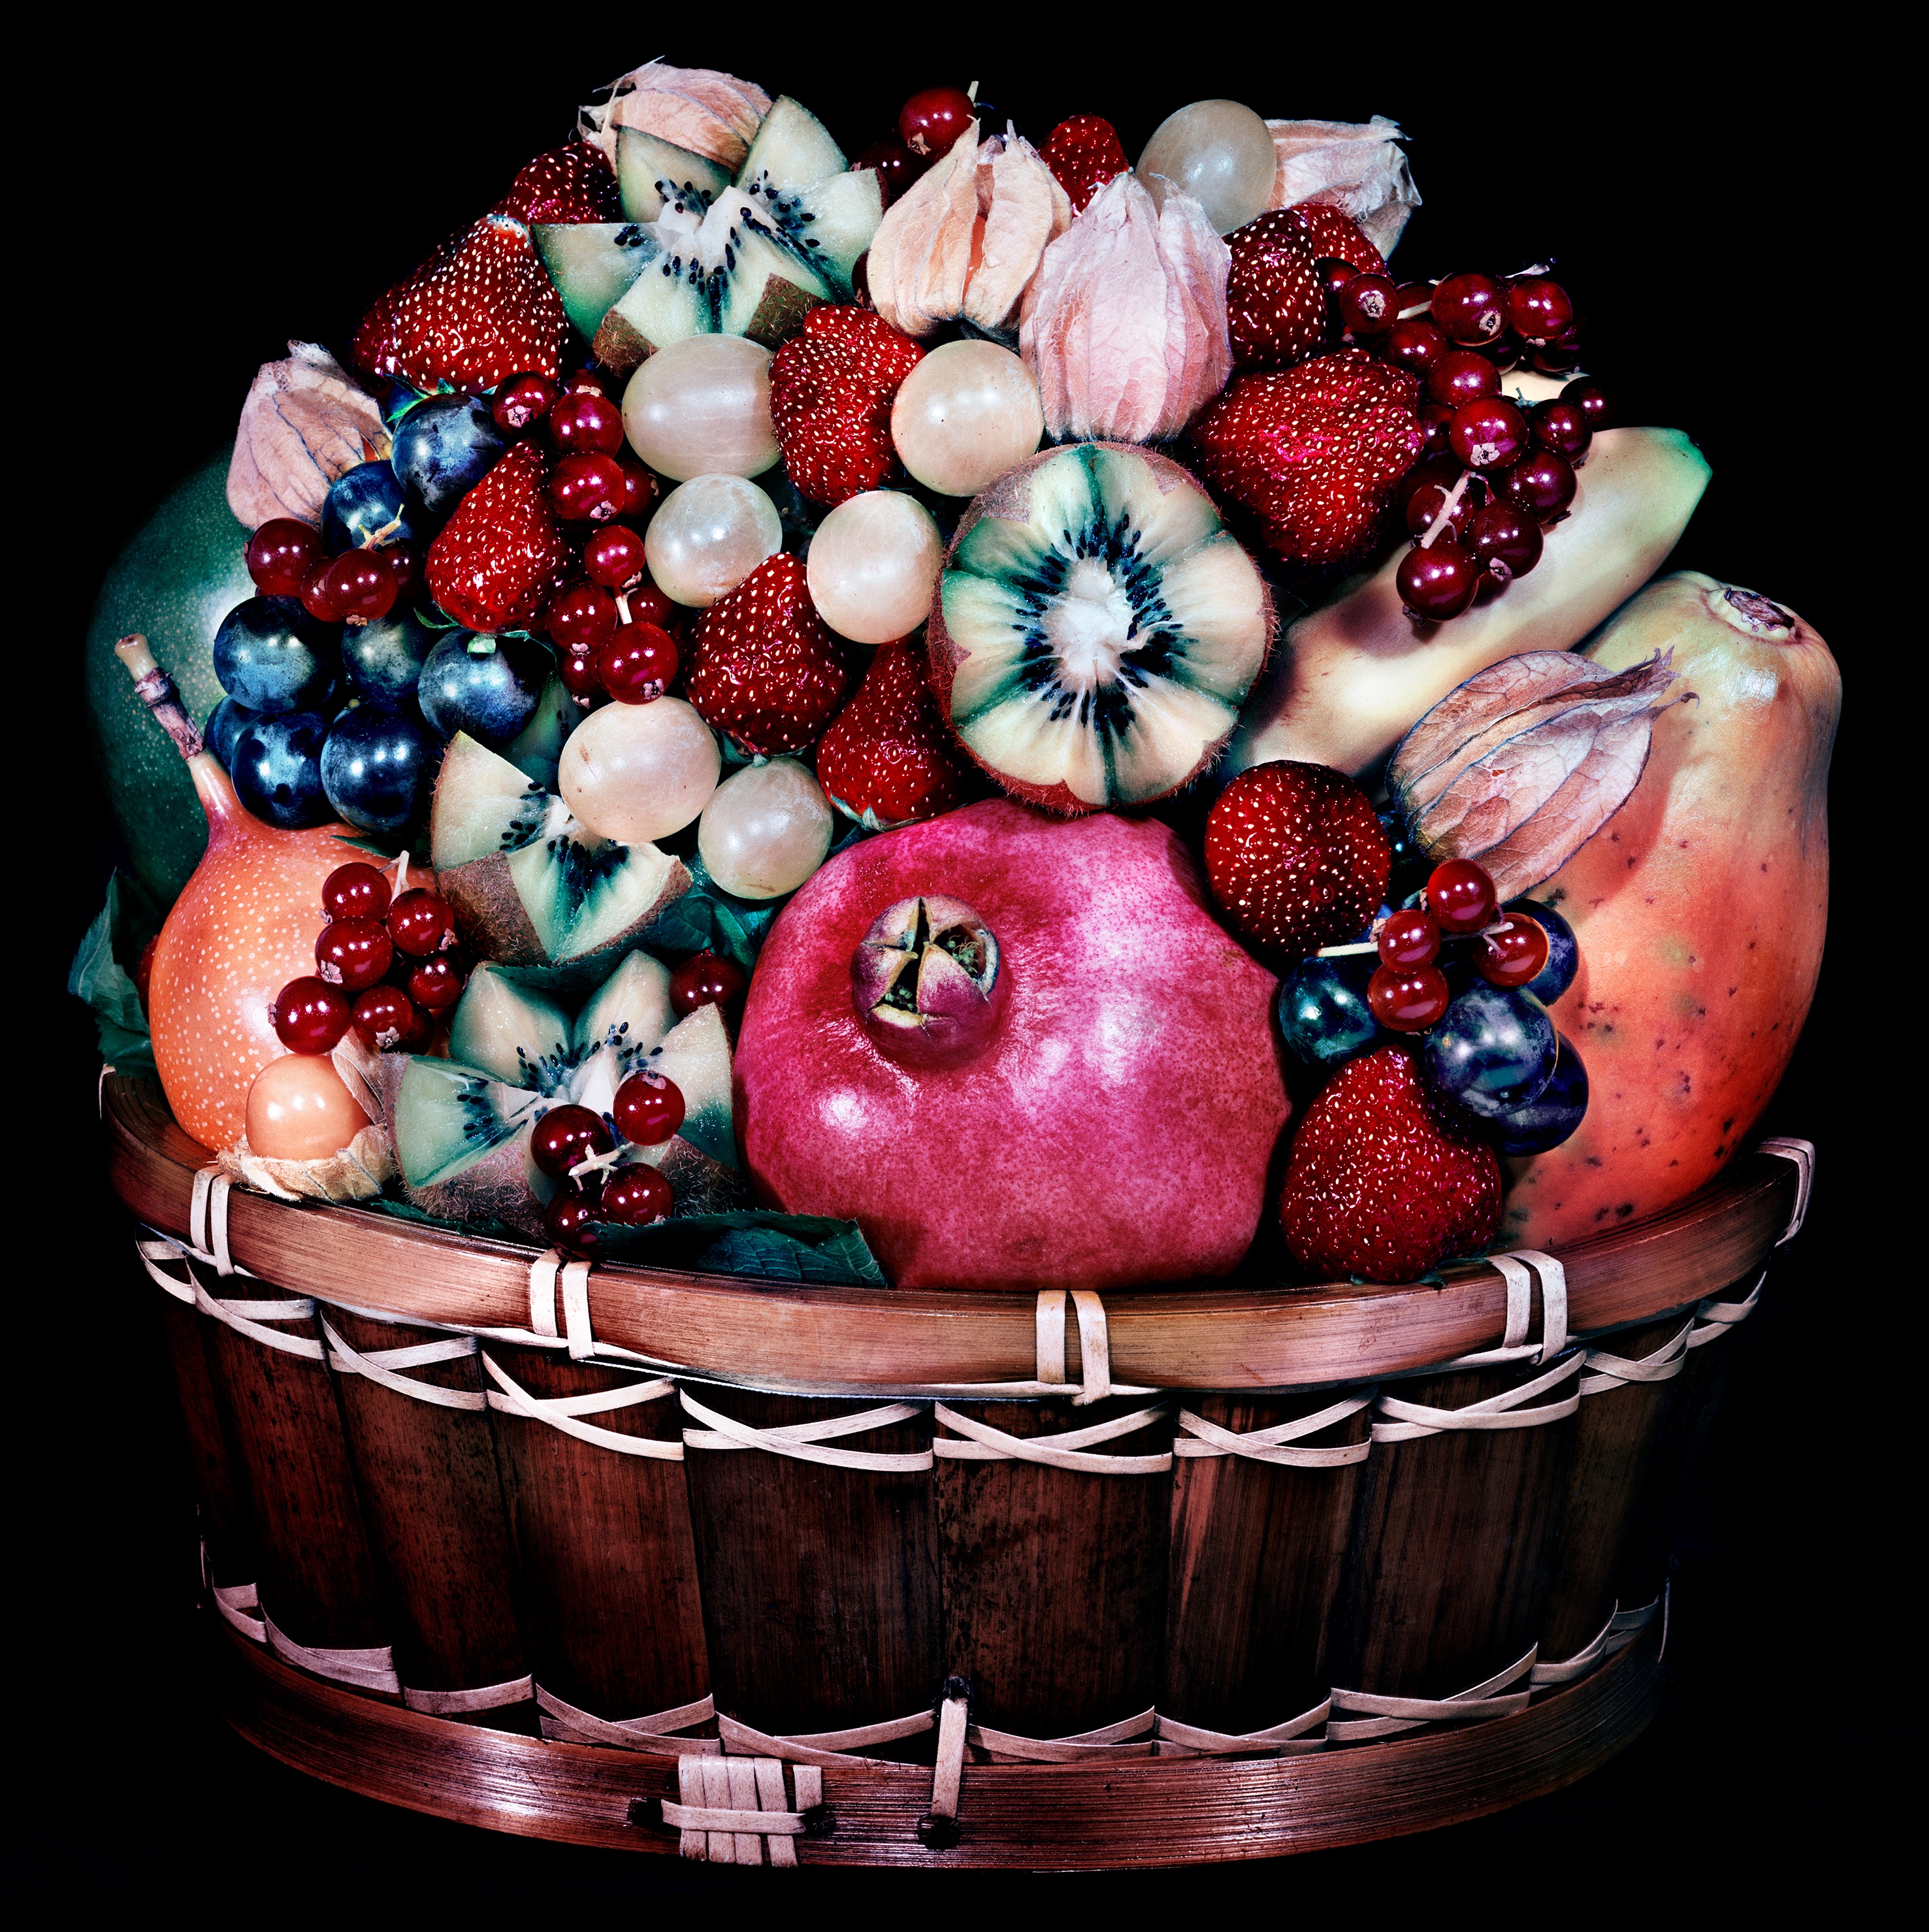 Valérie Belin - a photograph of a very colourful fruit  in a basket